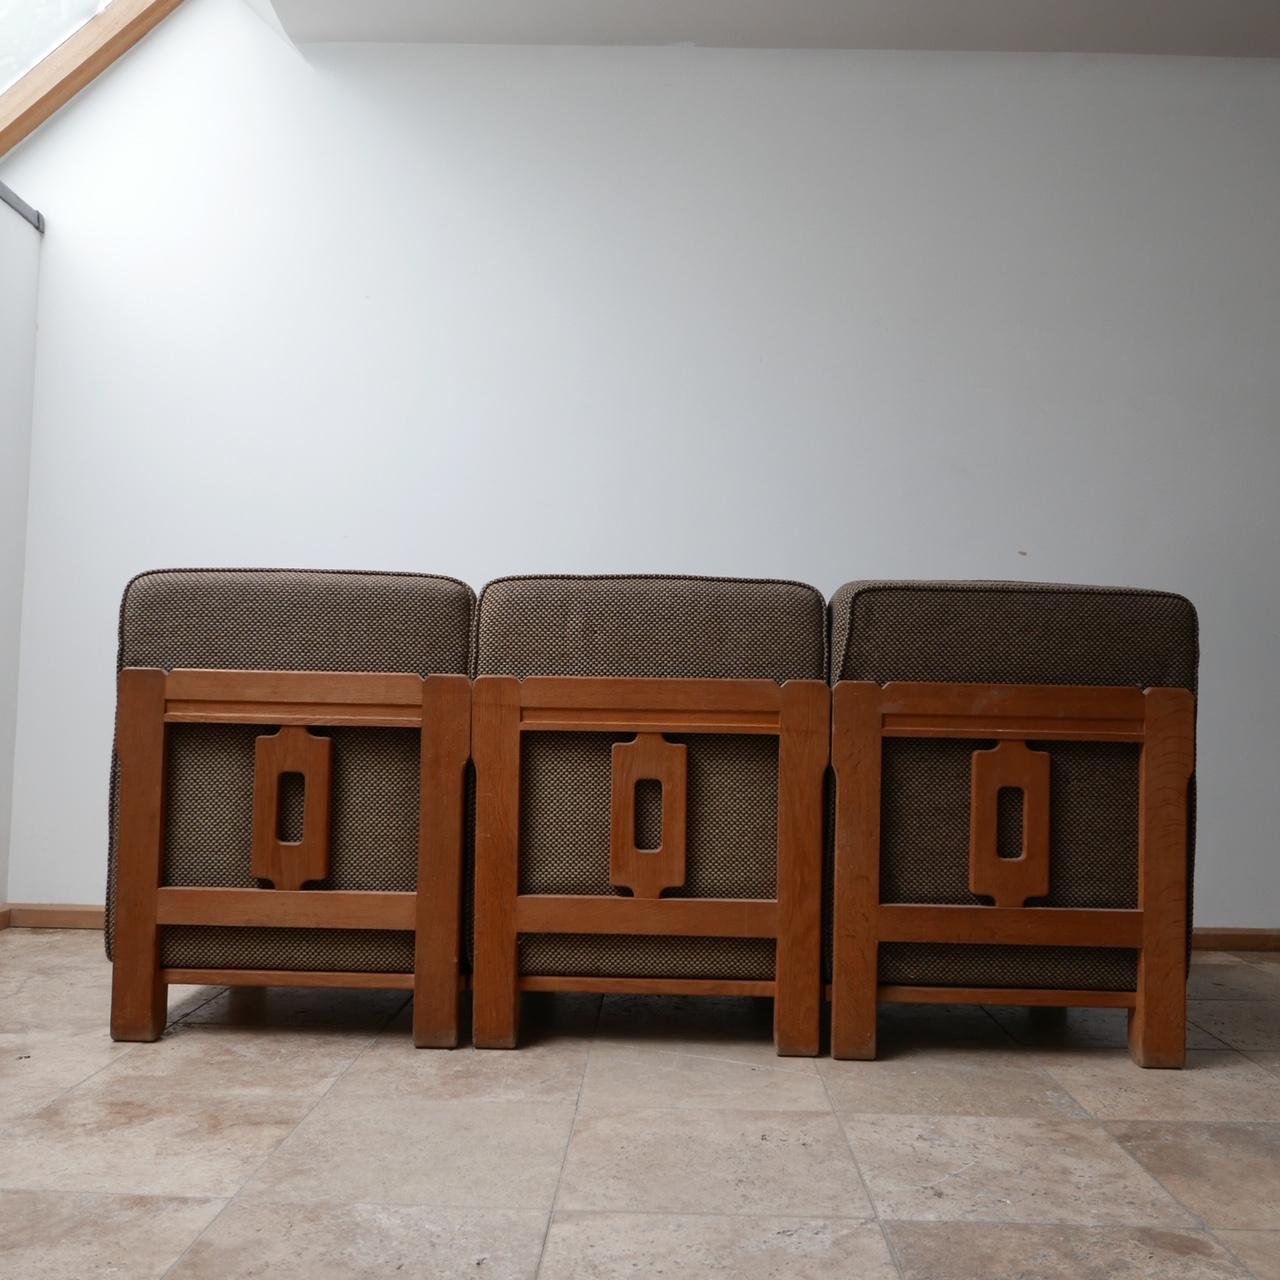 20th Century Guillerme et Chambron Mid-Century Oak Slipper Lounge Chairs or Sofa '3 pieces'